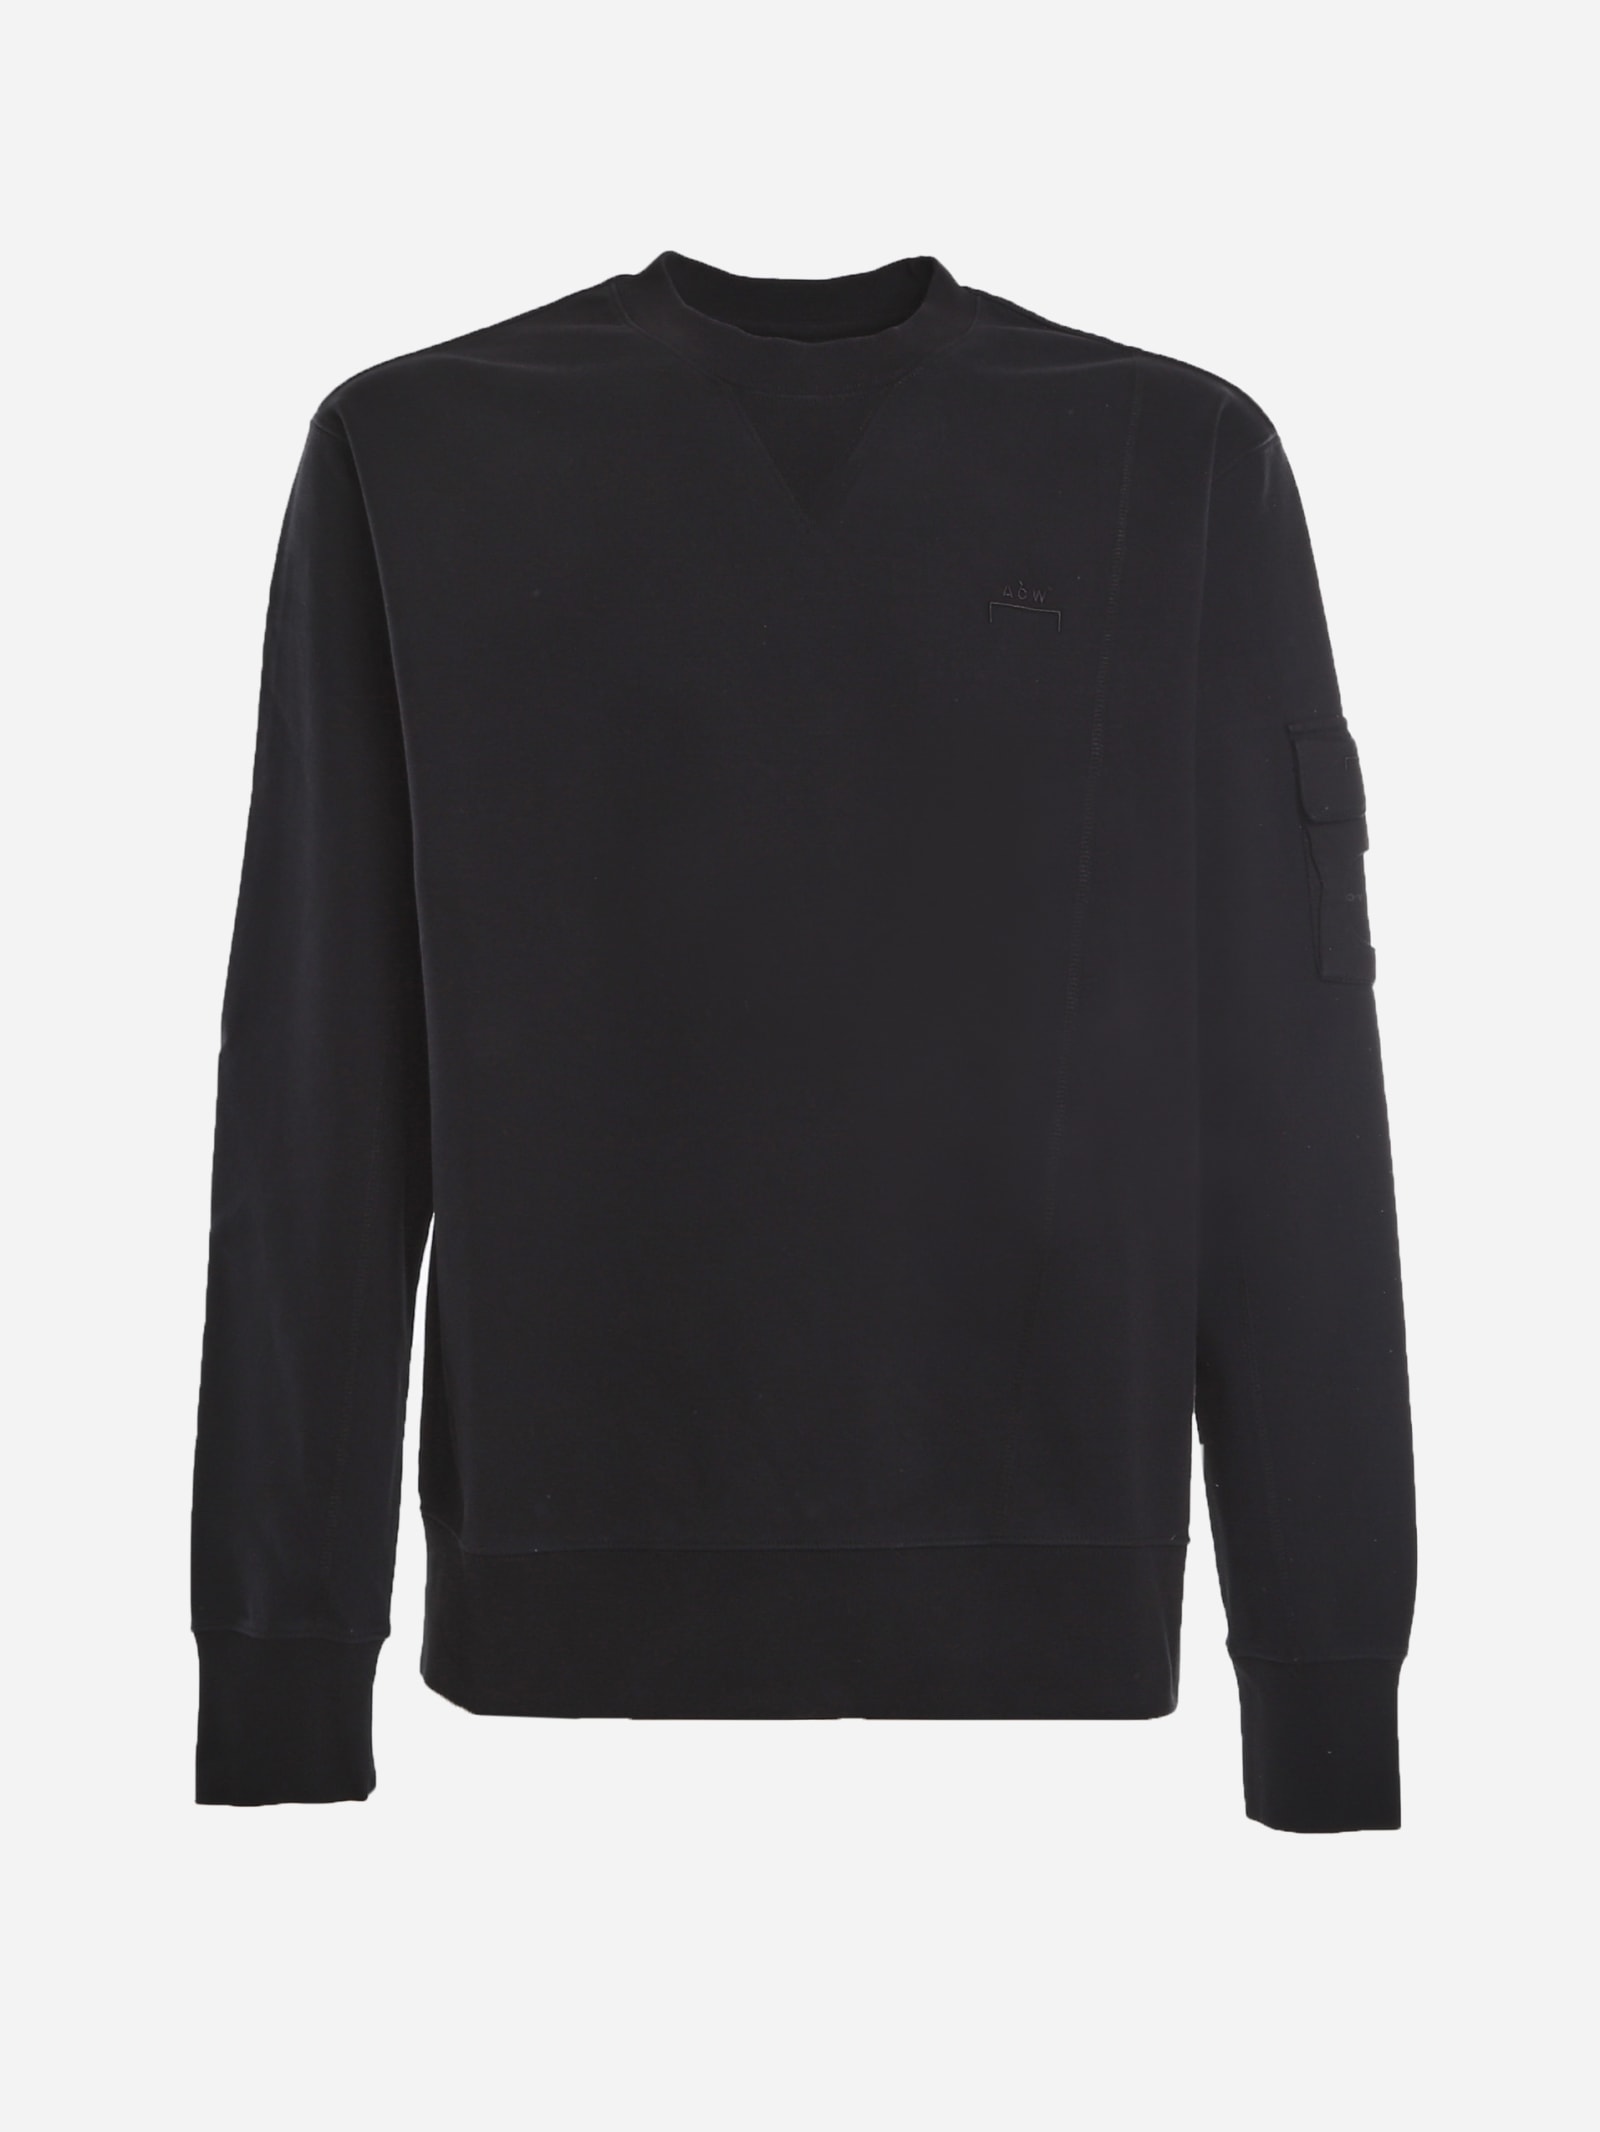 A-COLD-WALL Black Stretch Cotton Sweatshirt With Embroidered Logo